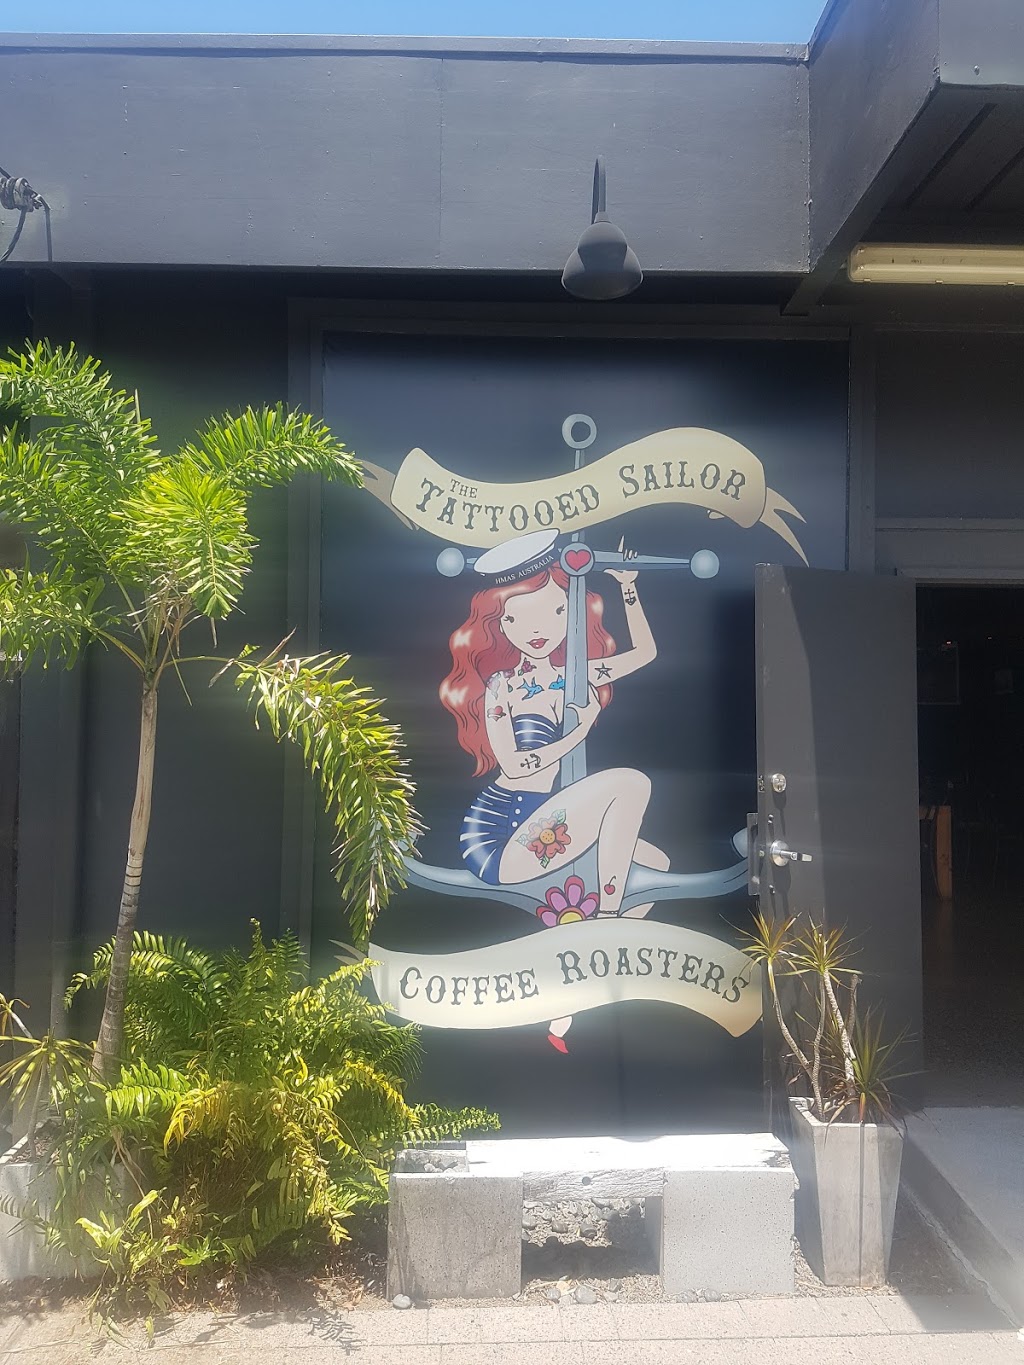 Tattooed Sailor Coffee Roasters | cafe | 176 Newell St, Bungalow QLD 4870, Australia | 0420901414 OR 